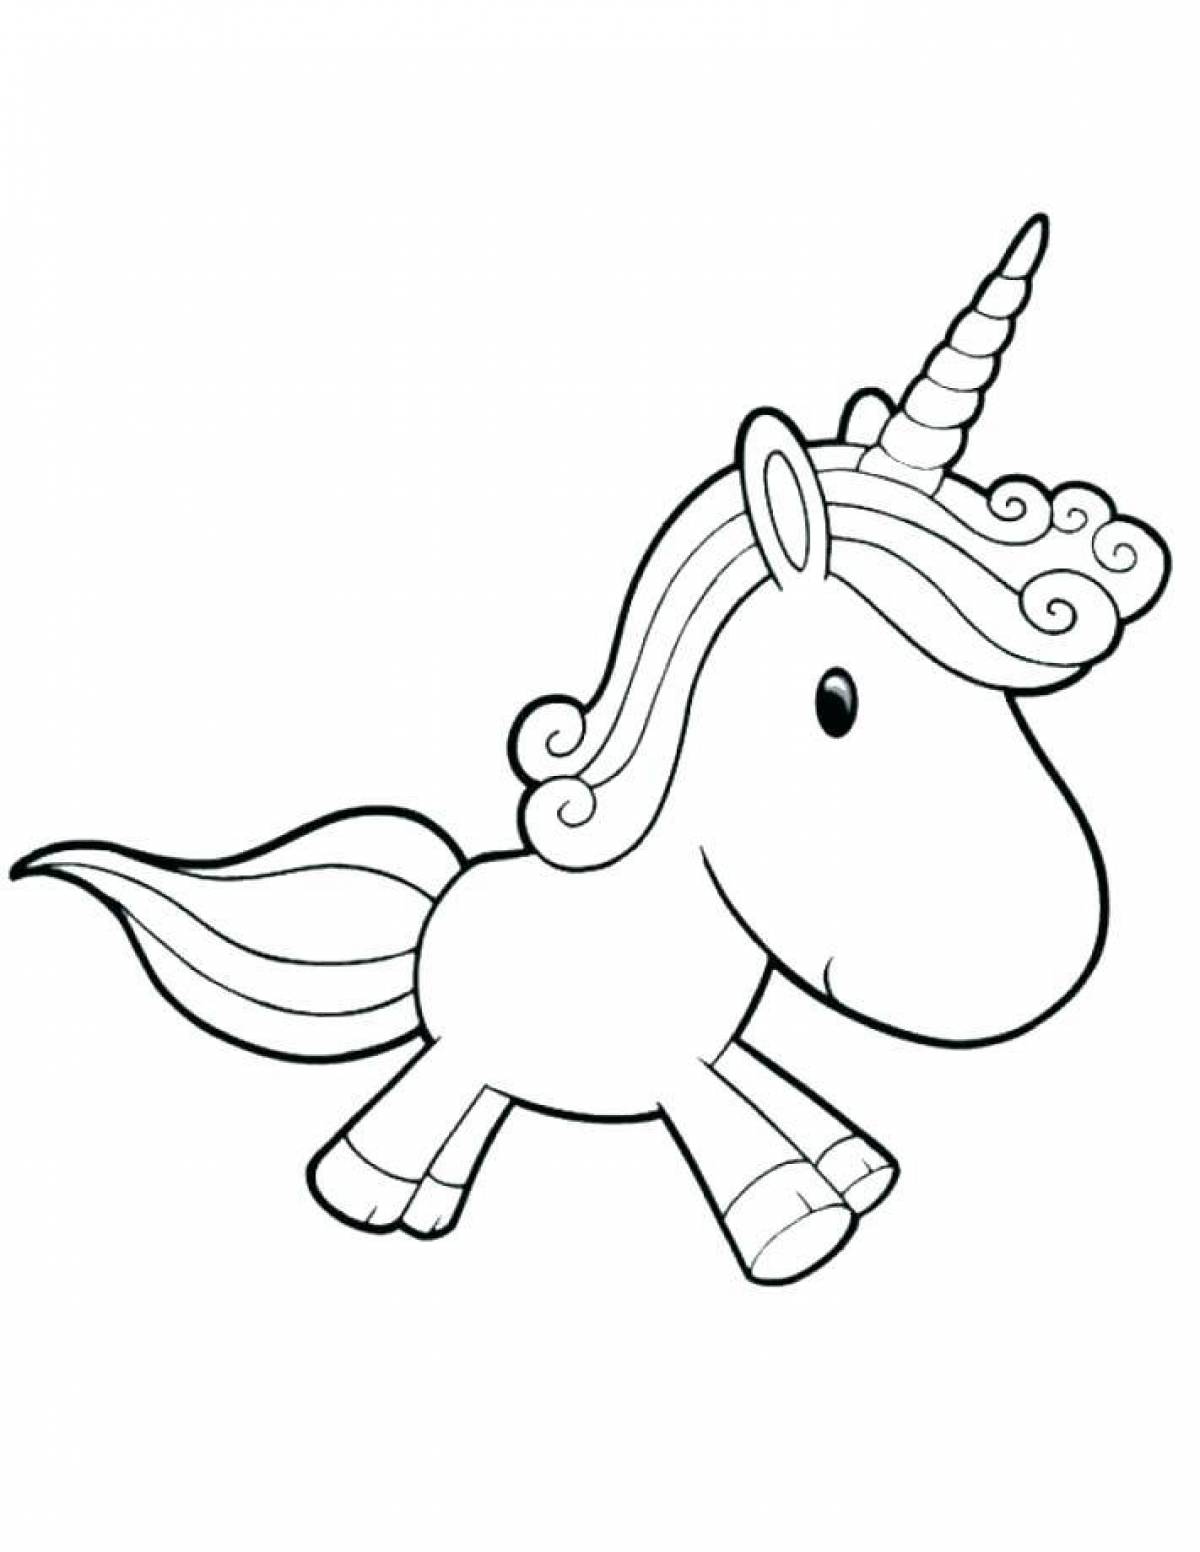 Blissful unicorn coloring book for kids 6-7 years old